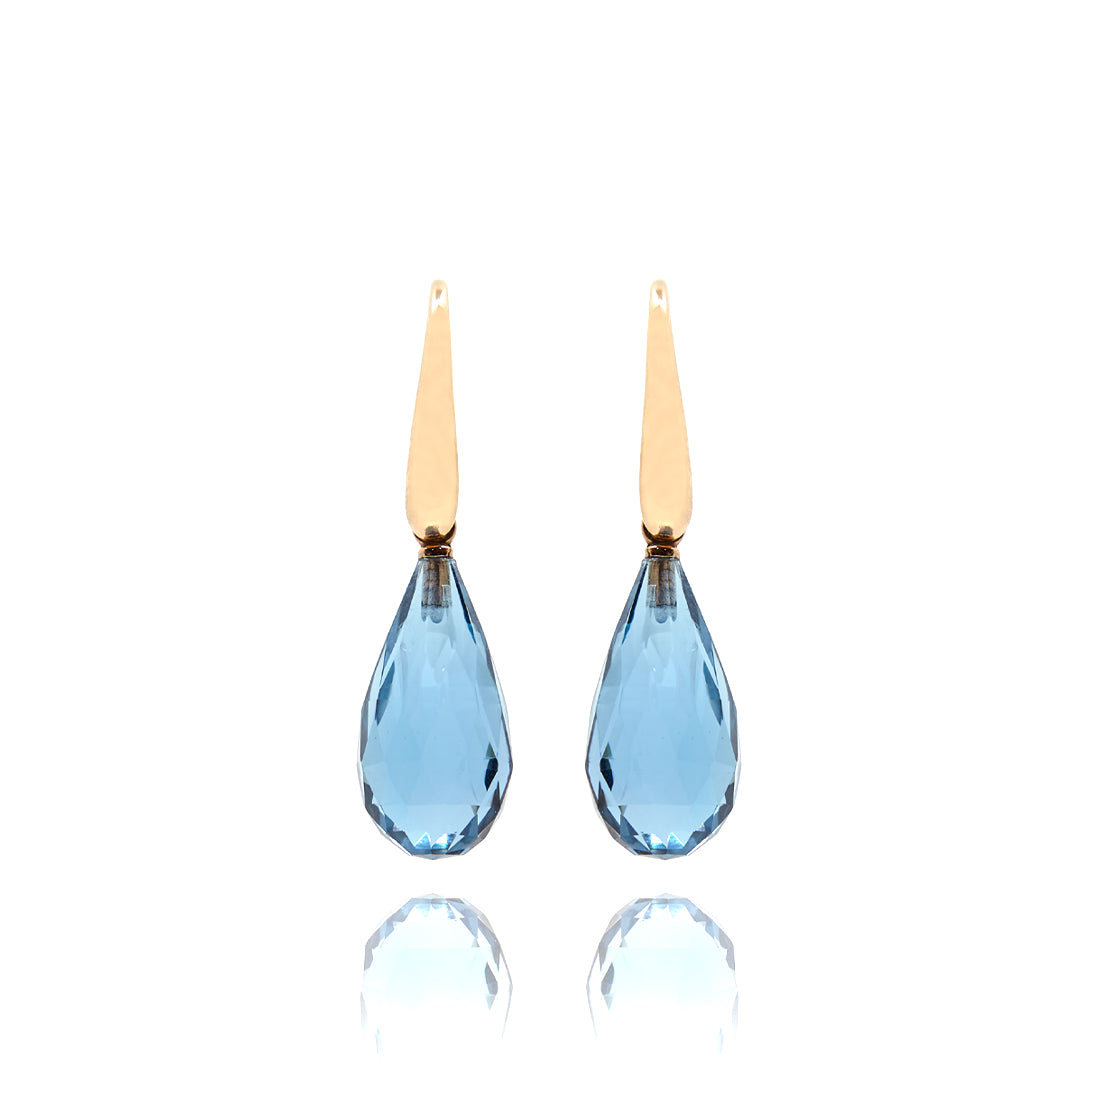 Rose gold earrings with London blue topaz 